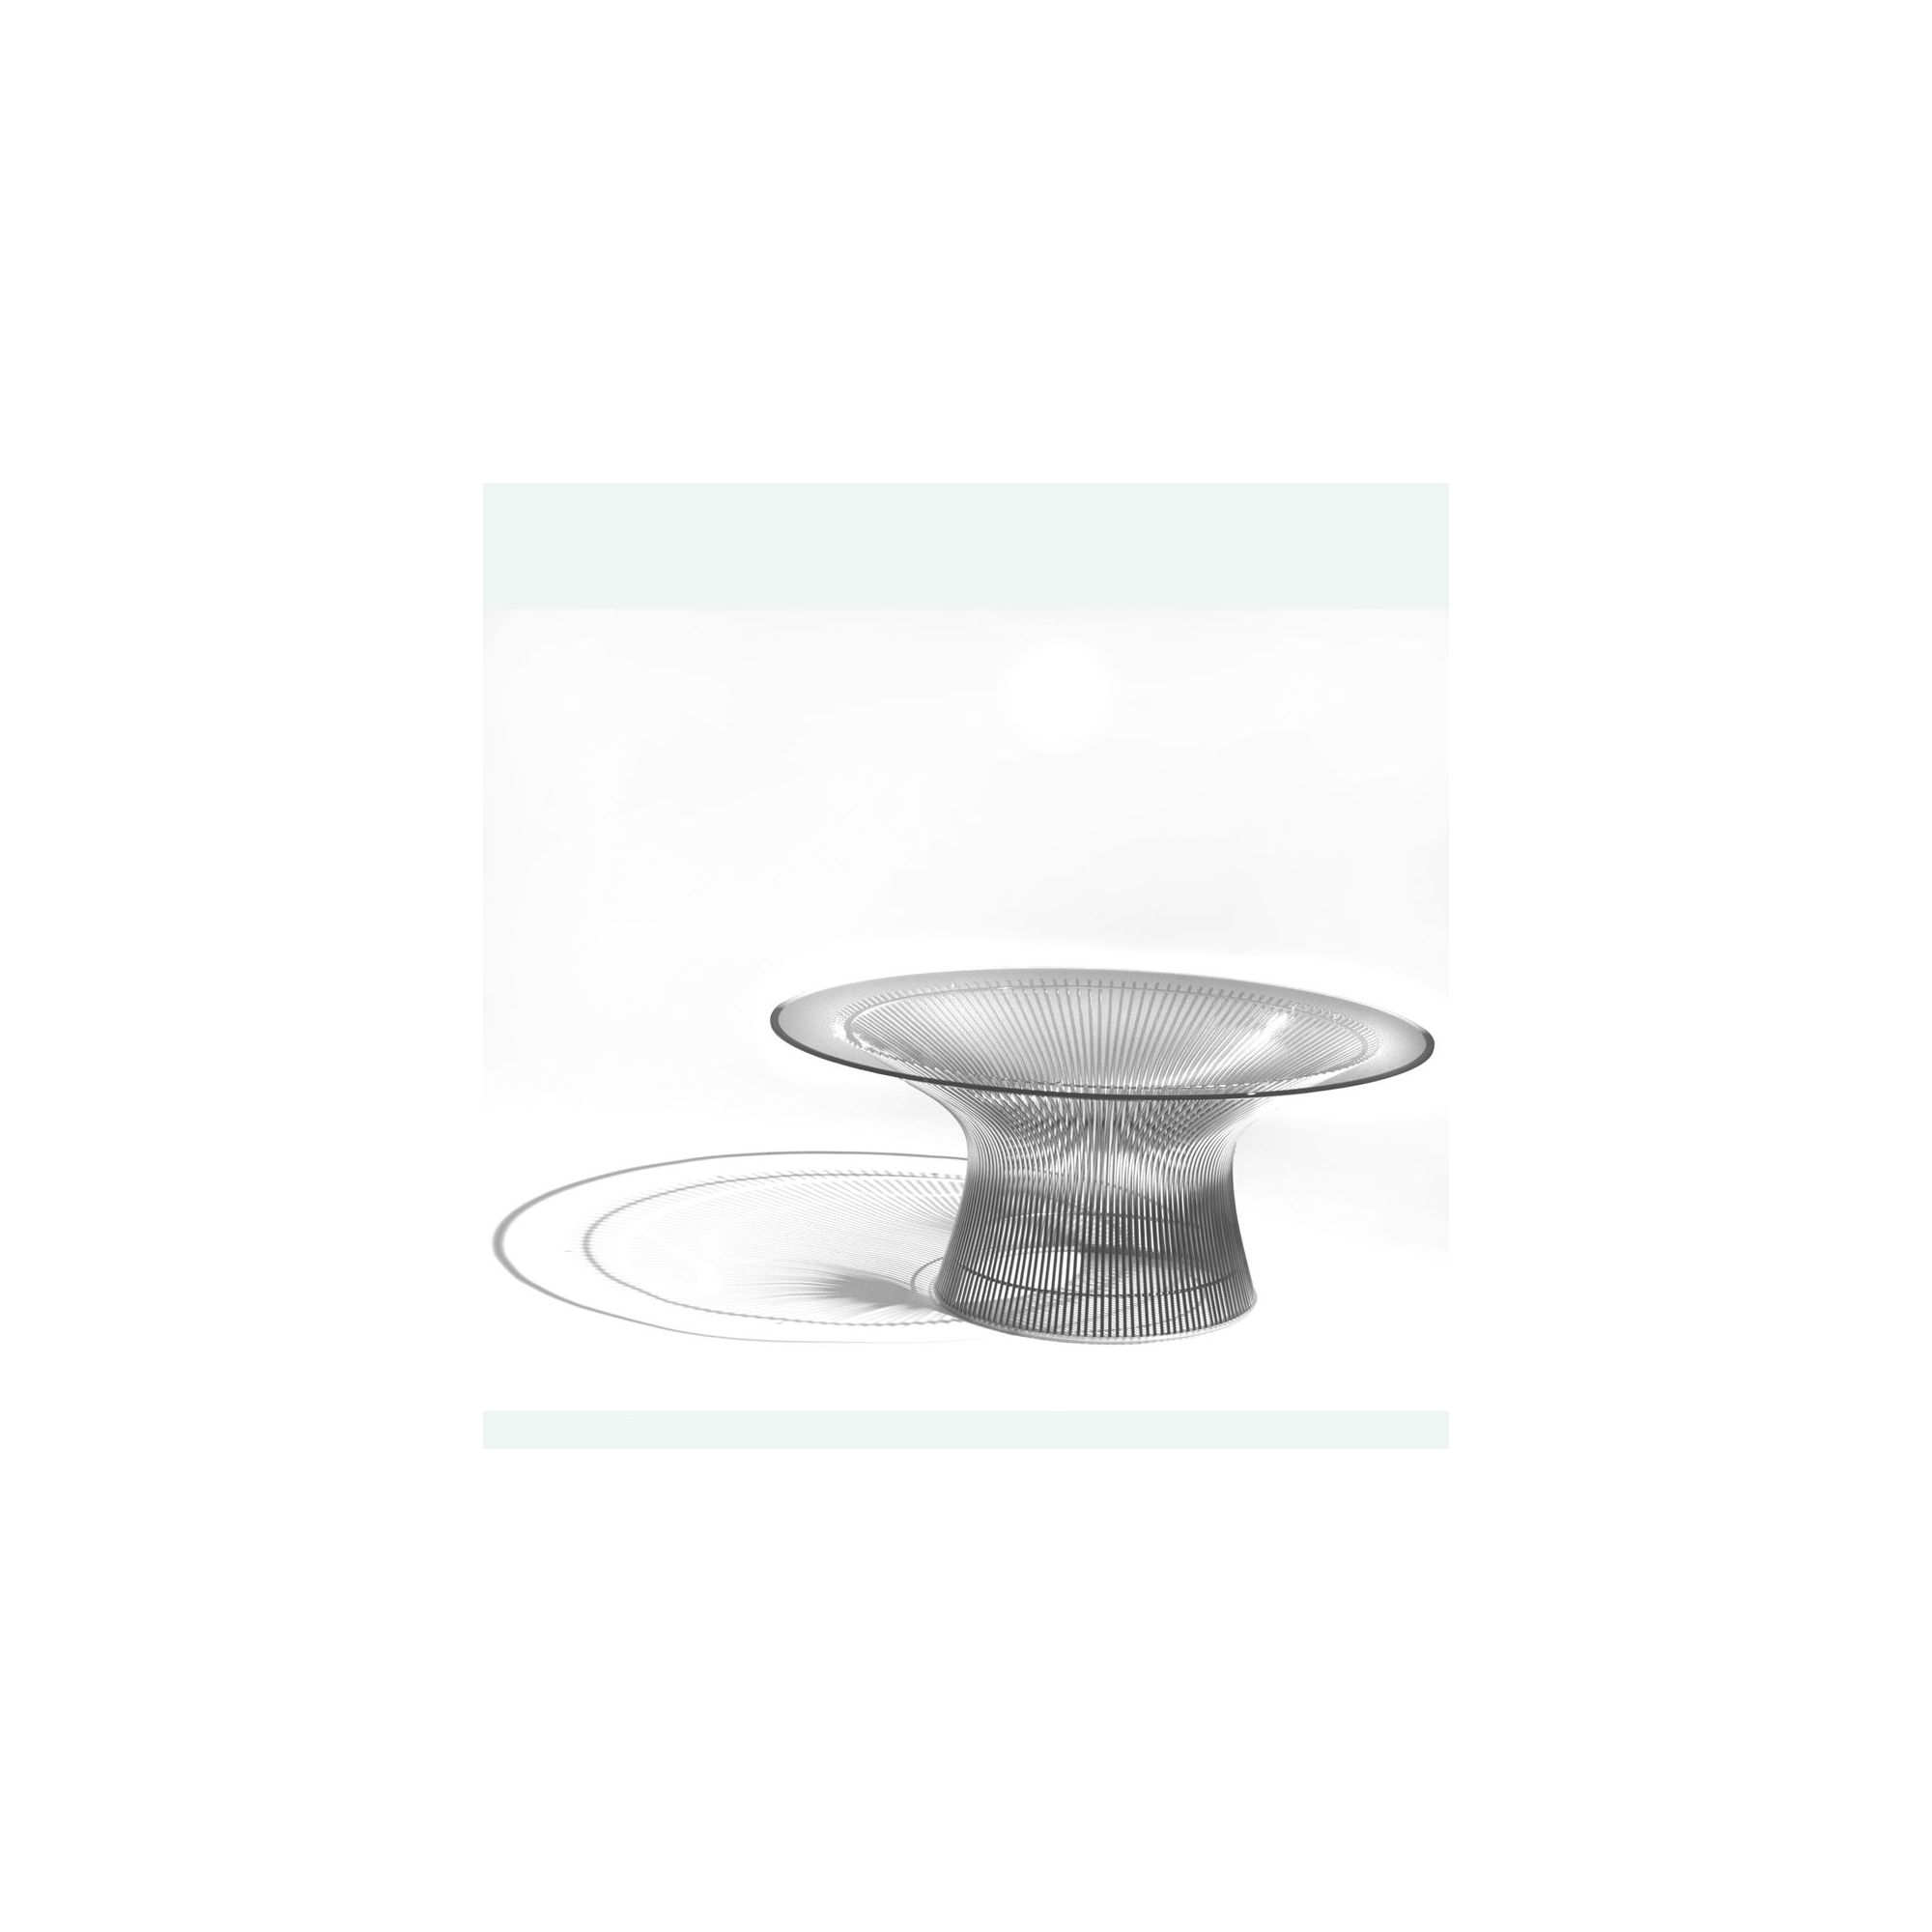 Knoll Coffee Table by Warren Platner - 91.5cm Dia / Metallic Bronze / Clear Glass at Tesco Direct